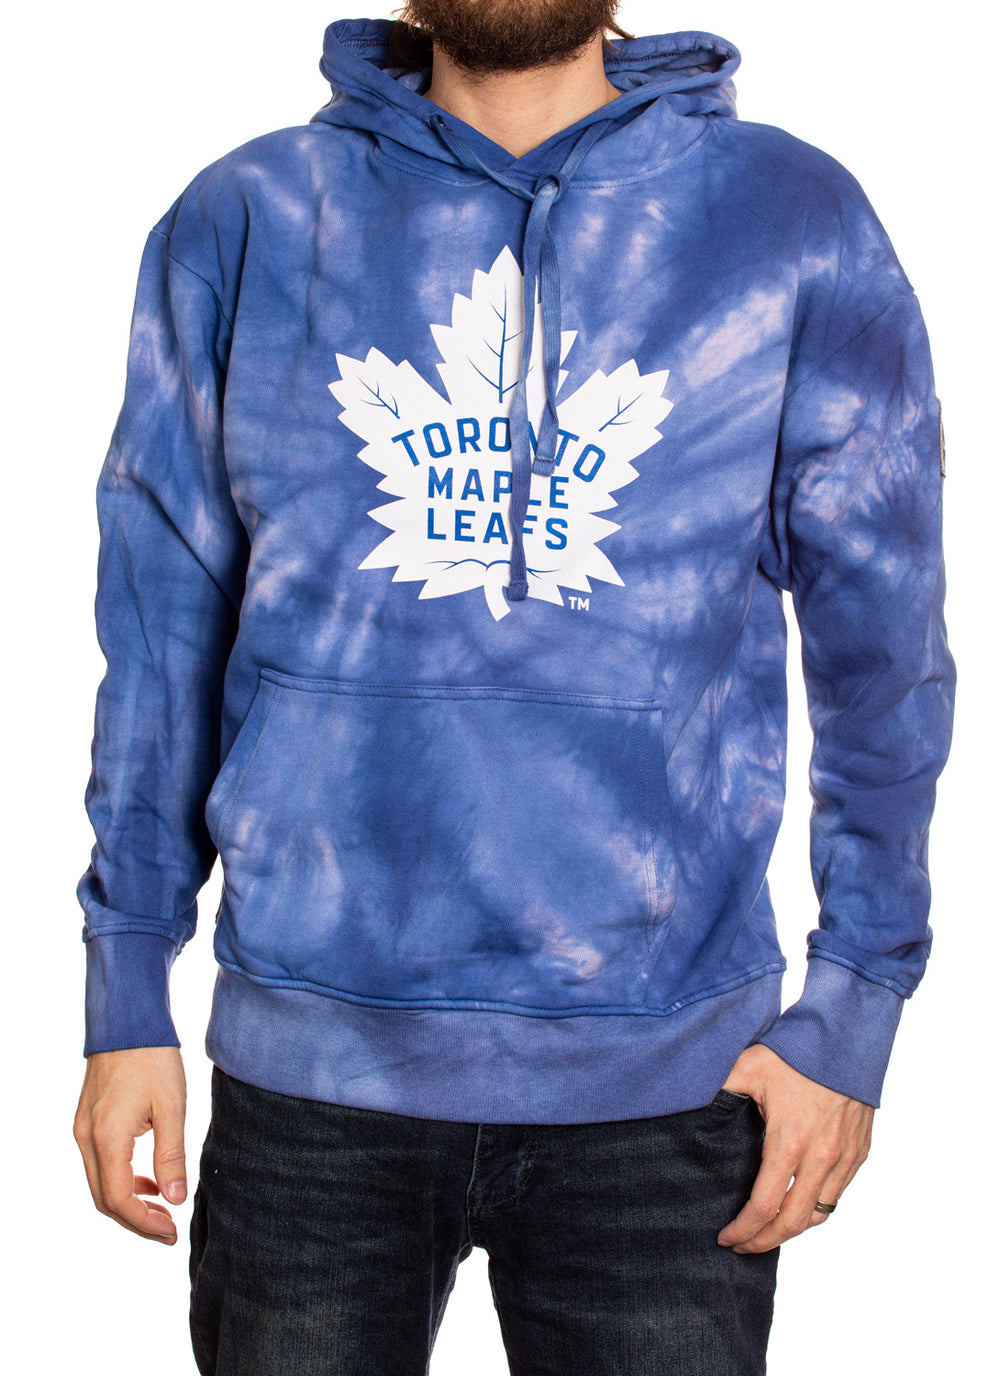 🏒GO LEAFS GO!🏒 We have a variety of Toronto Maple Leaf jerseys, crop  tops, hoodies, varsity tees and more. #torontomapleleafs…